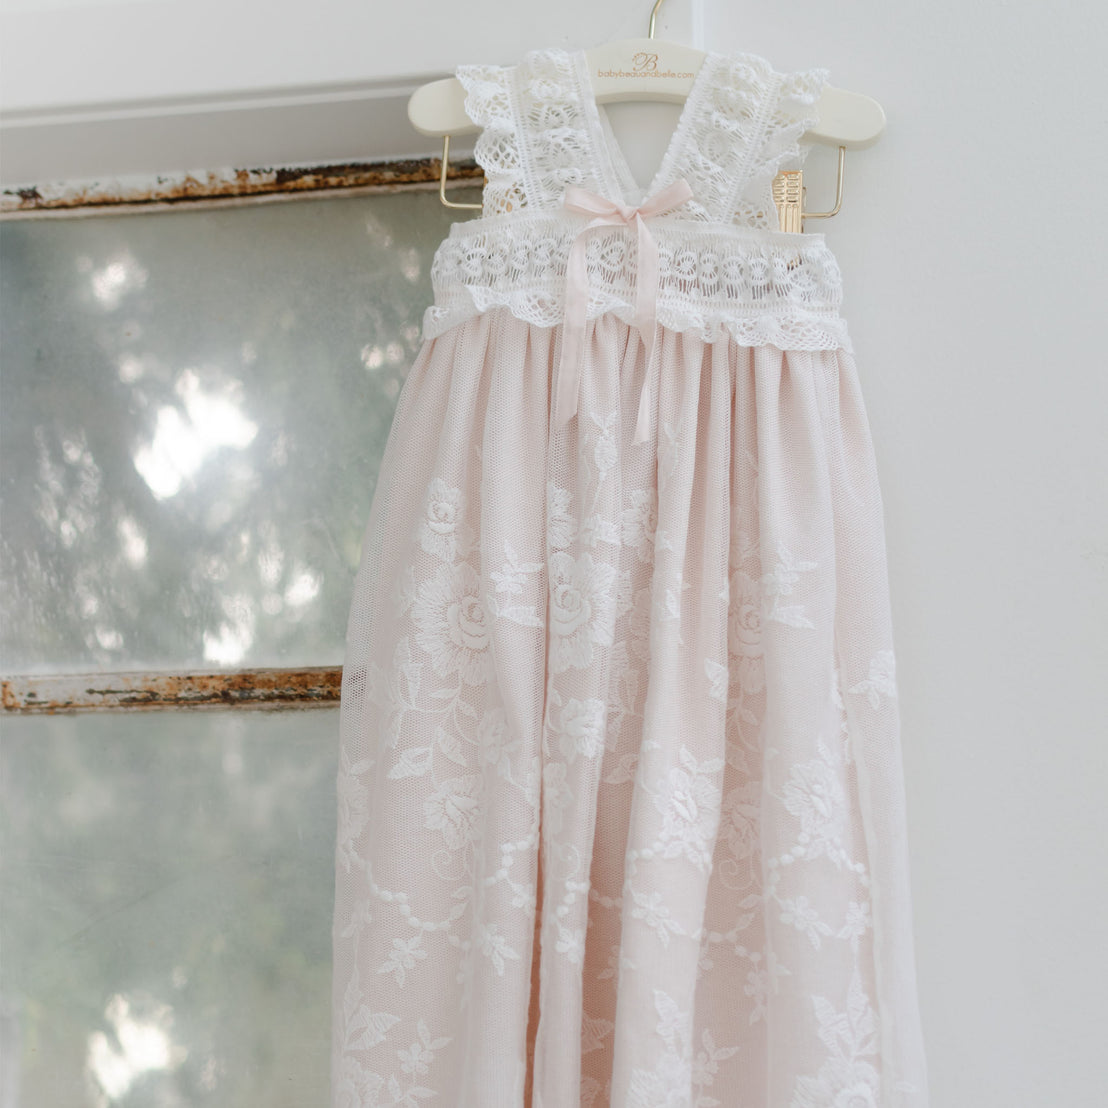 A delicate pink and white Charlotte Christening Gown & Bonnet hangs on a wooden hanger against a white wall, reflecting soft light. The dress features intricate lace patterns and a flowing skirt.